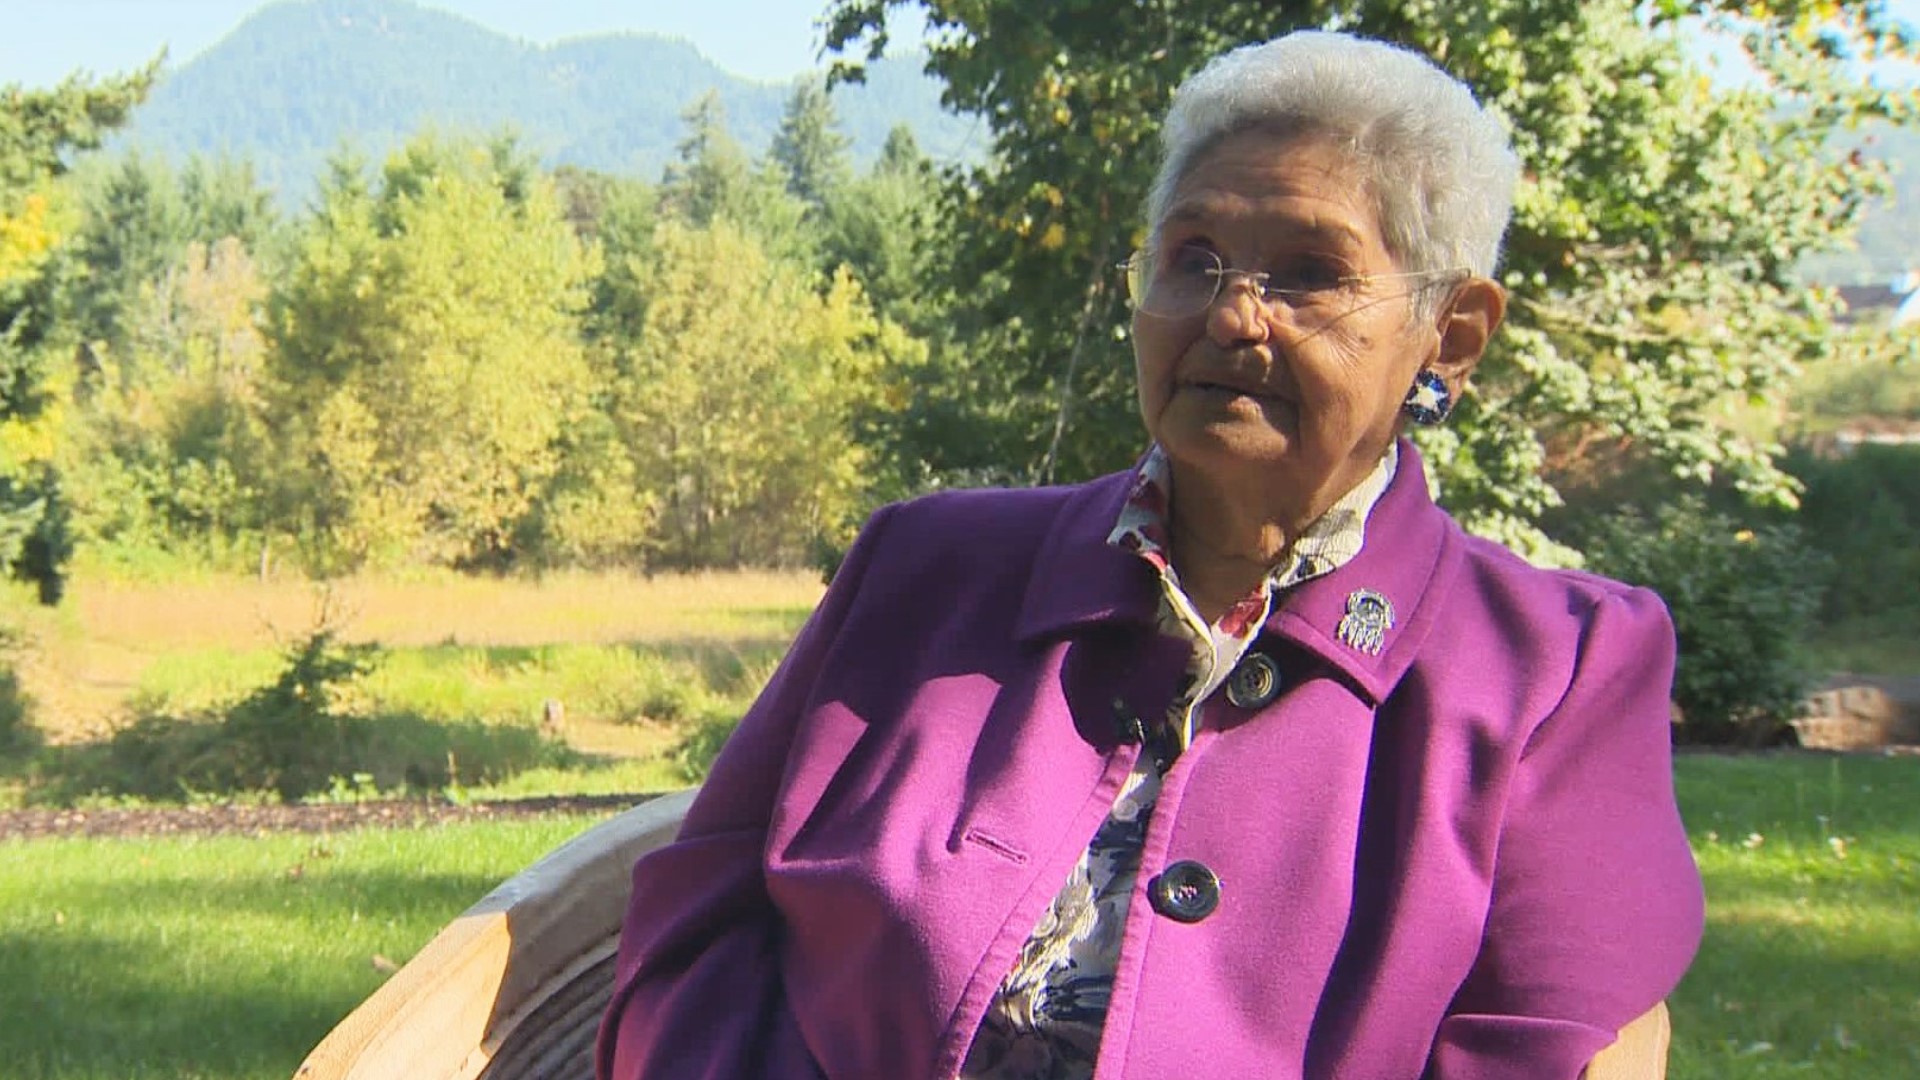 Kathryn Harrison passed away on Sunday at the age of 99. She was known, in particular, for her efforts to restore Native American tribal status.